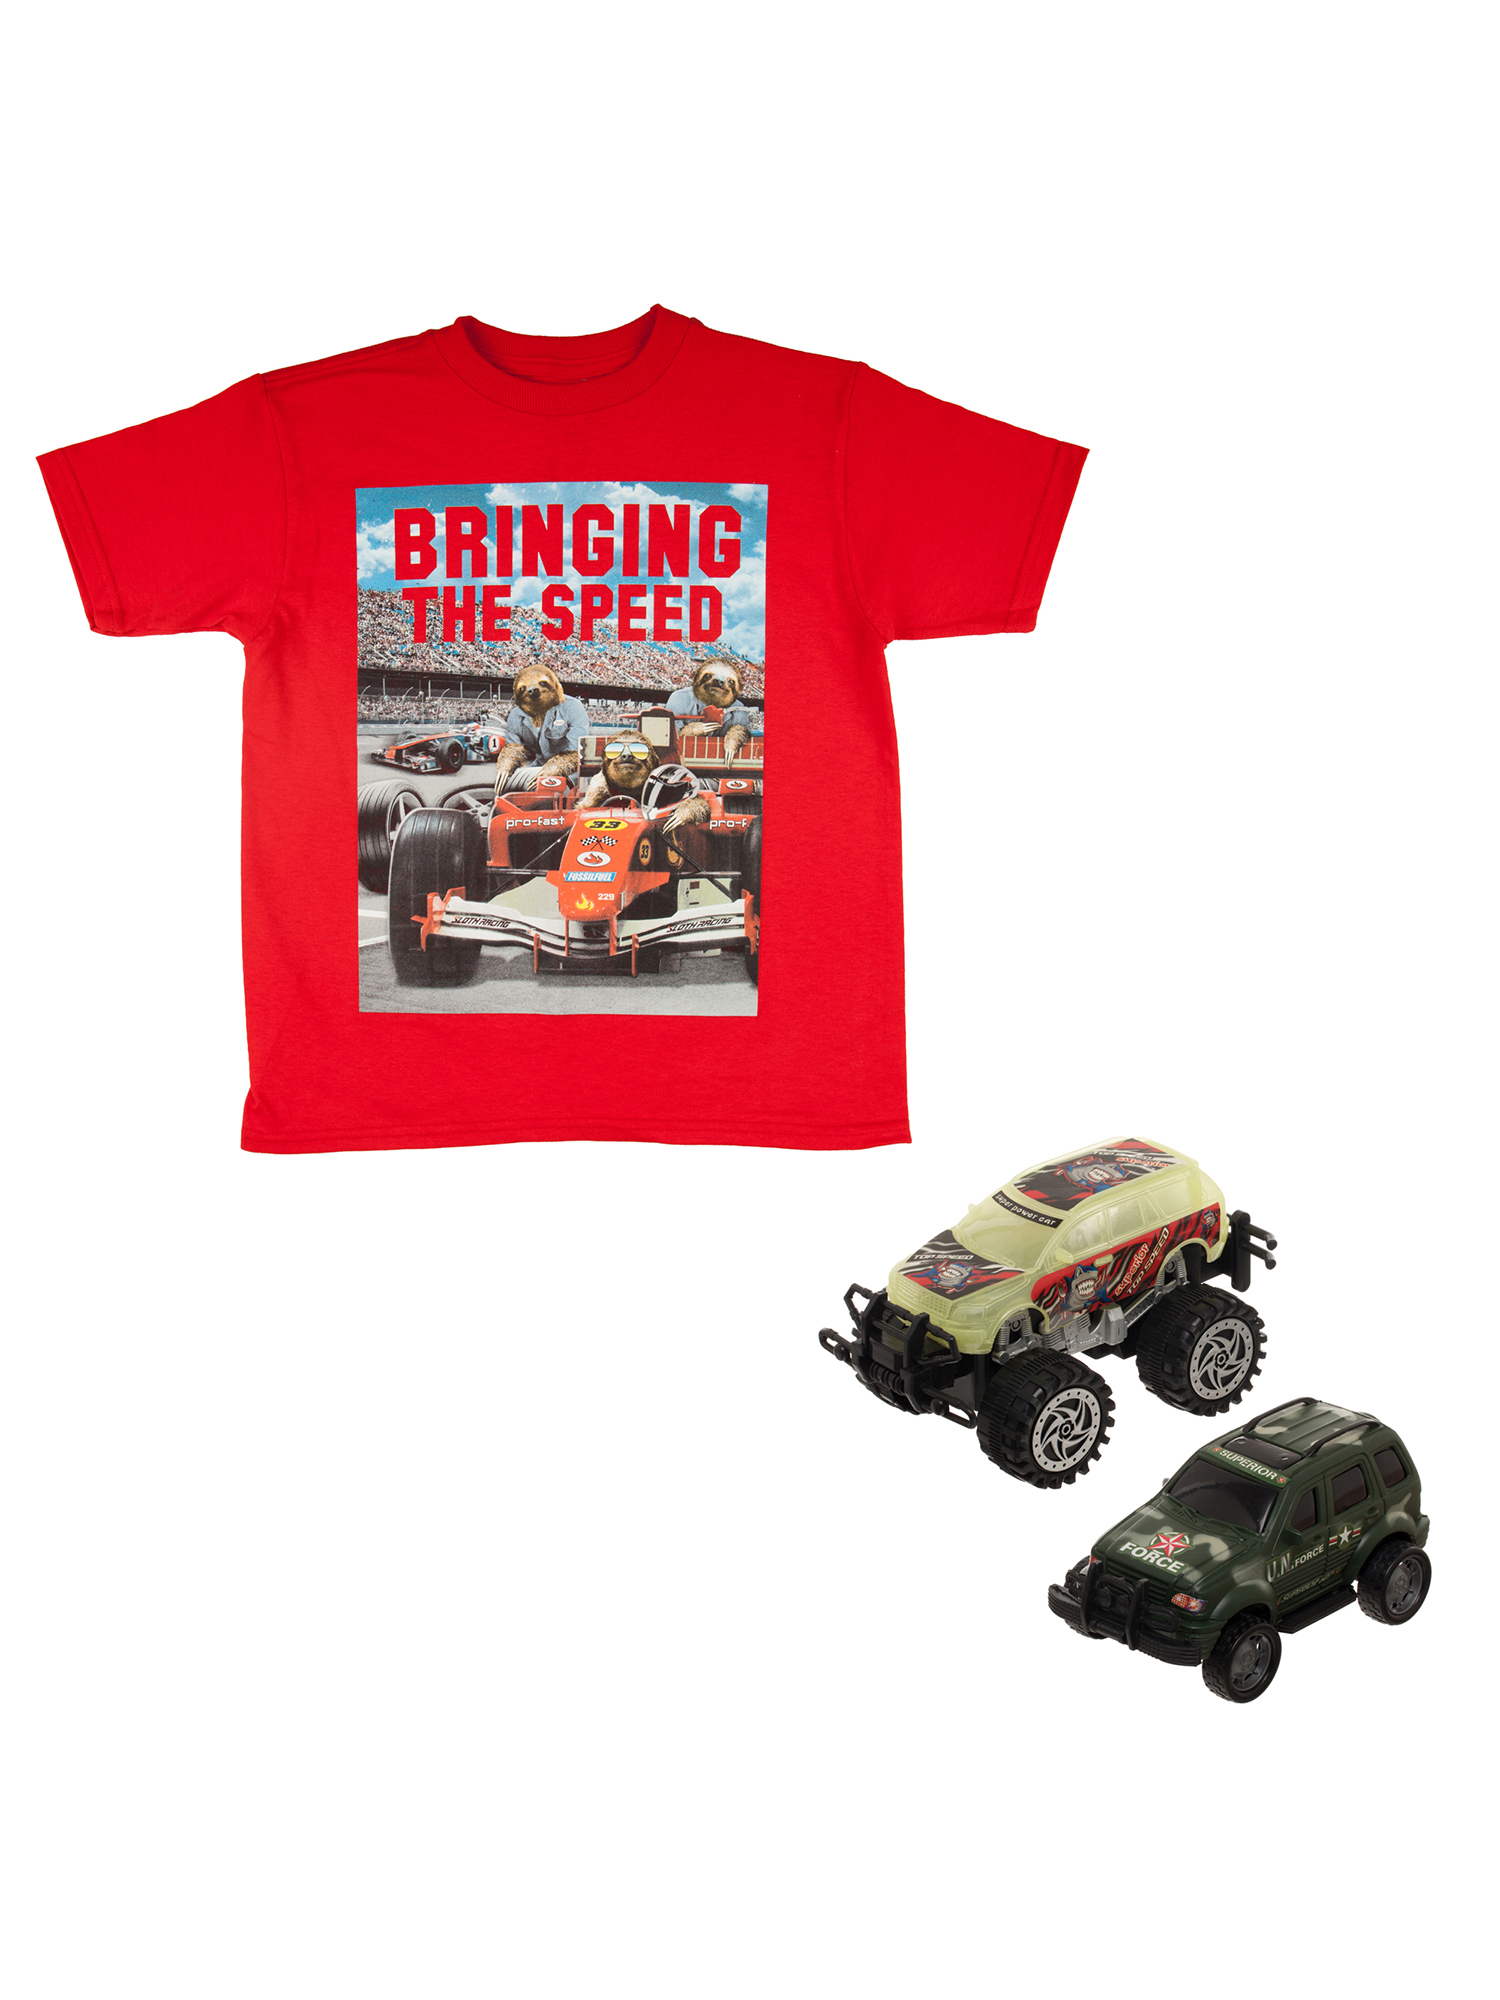 Bioworld "Bringing On The Speed" Red Short Sleeve Graphic T-Shirt Including Camo Truck Toy Gift With Purchase (Little Boys & Big Boys) - image 1 of 4